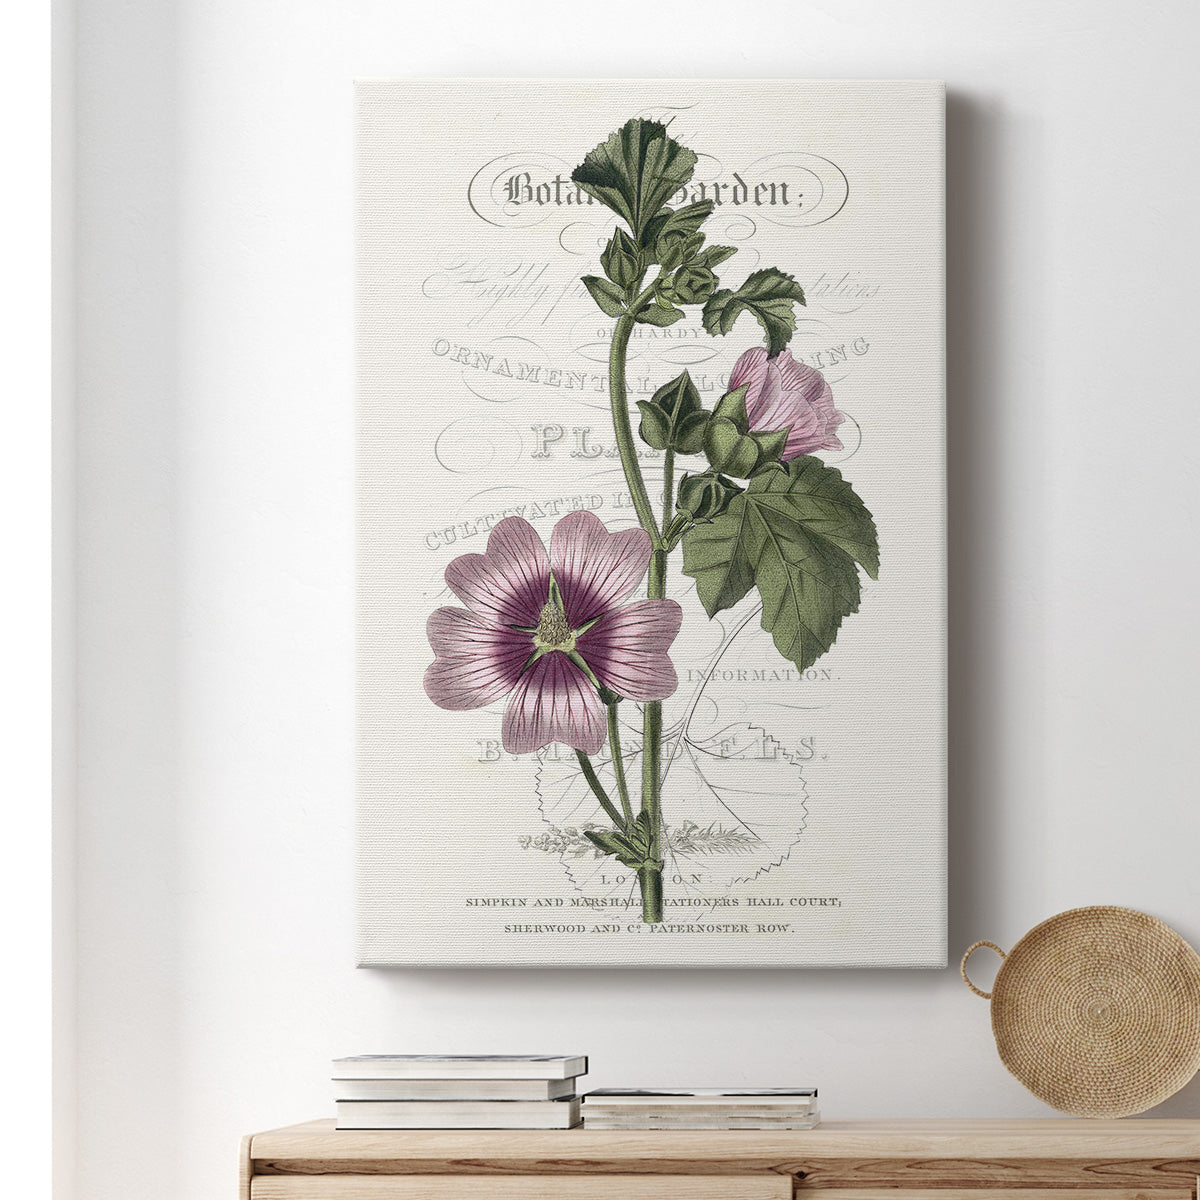 Flower Garden Varietals IV Premium Gallery Wrapped Canvas - Ready to Hang